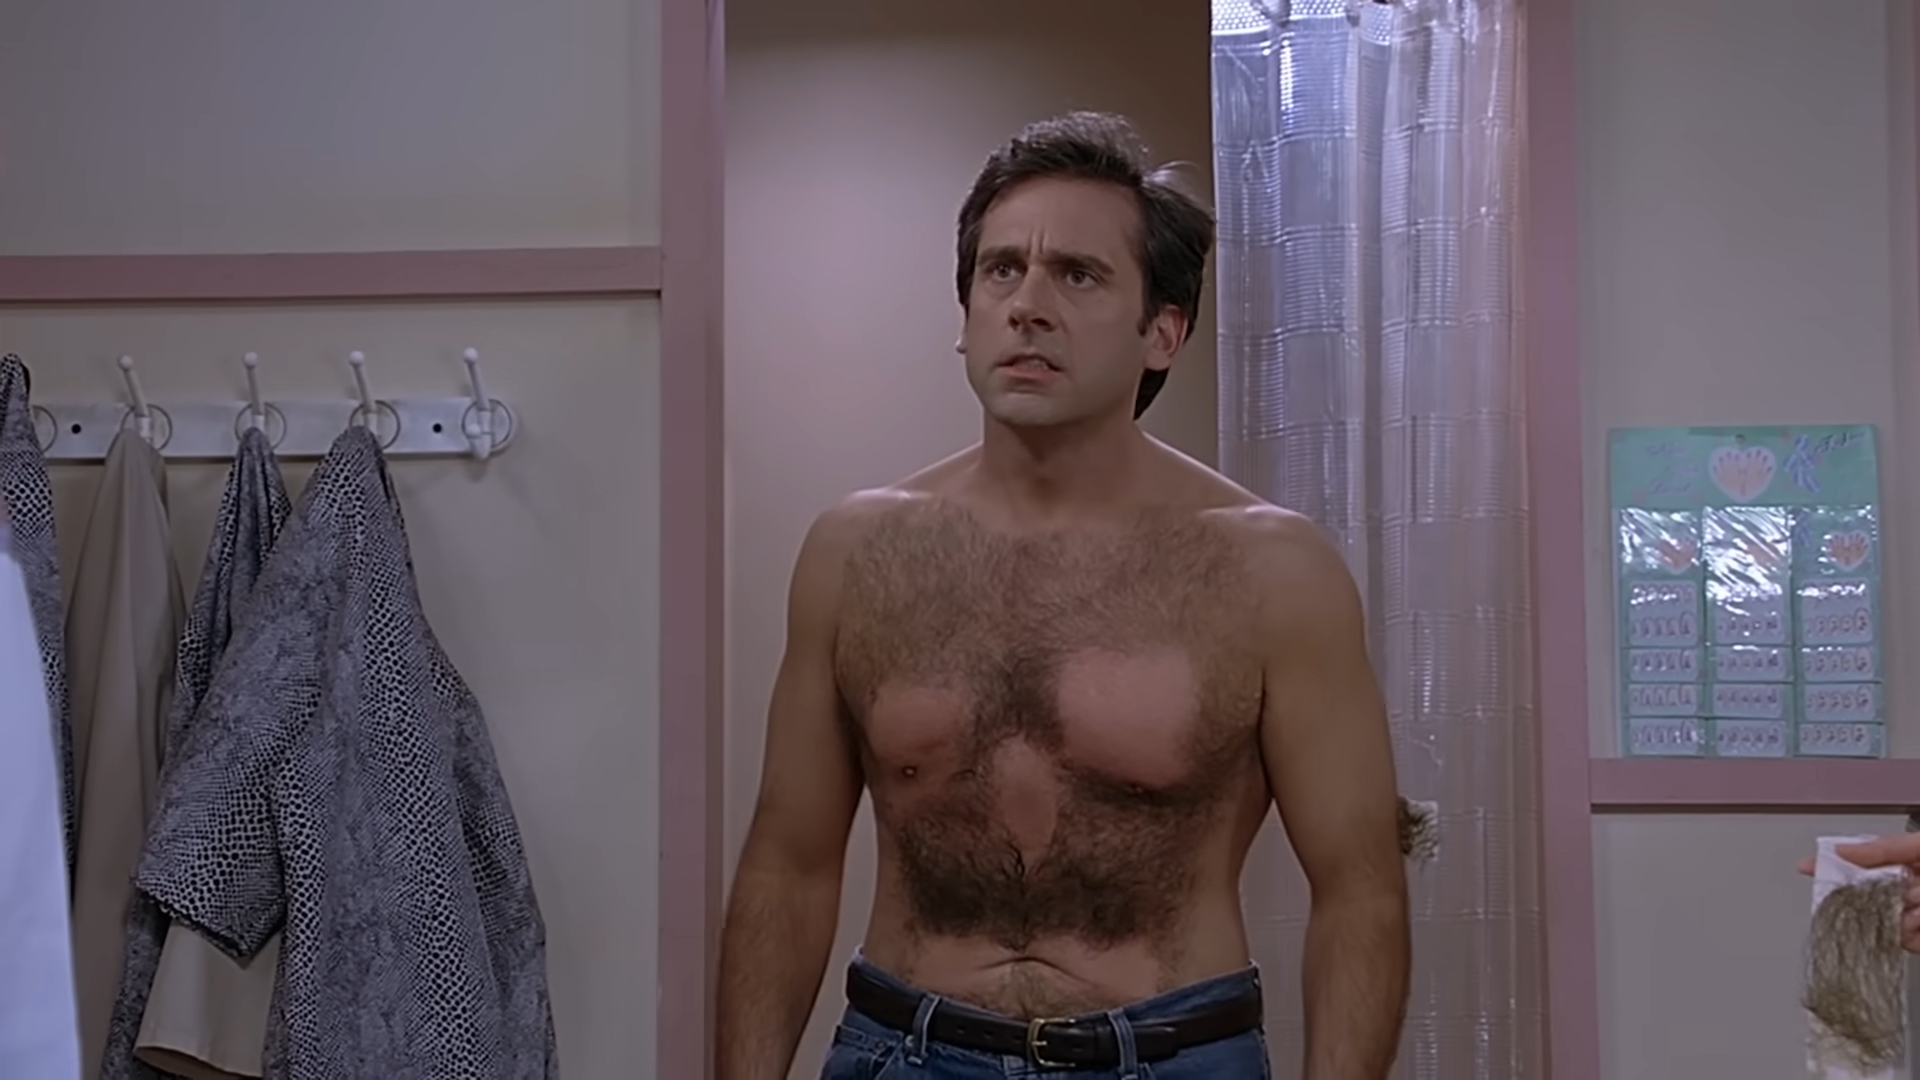 Steve Carell as Andy in &quot;The 40-Year-Old Virgin&quot; is in the middle of getting his chest waxed